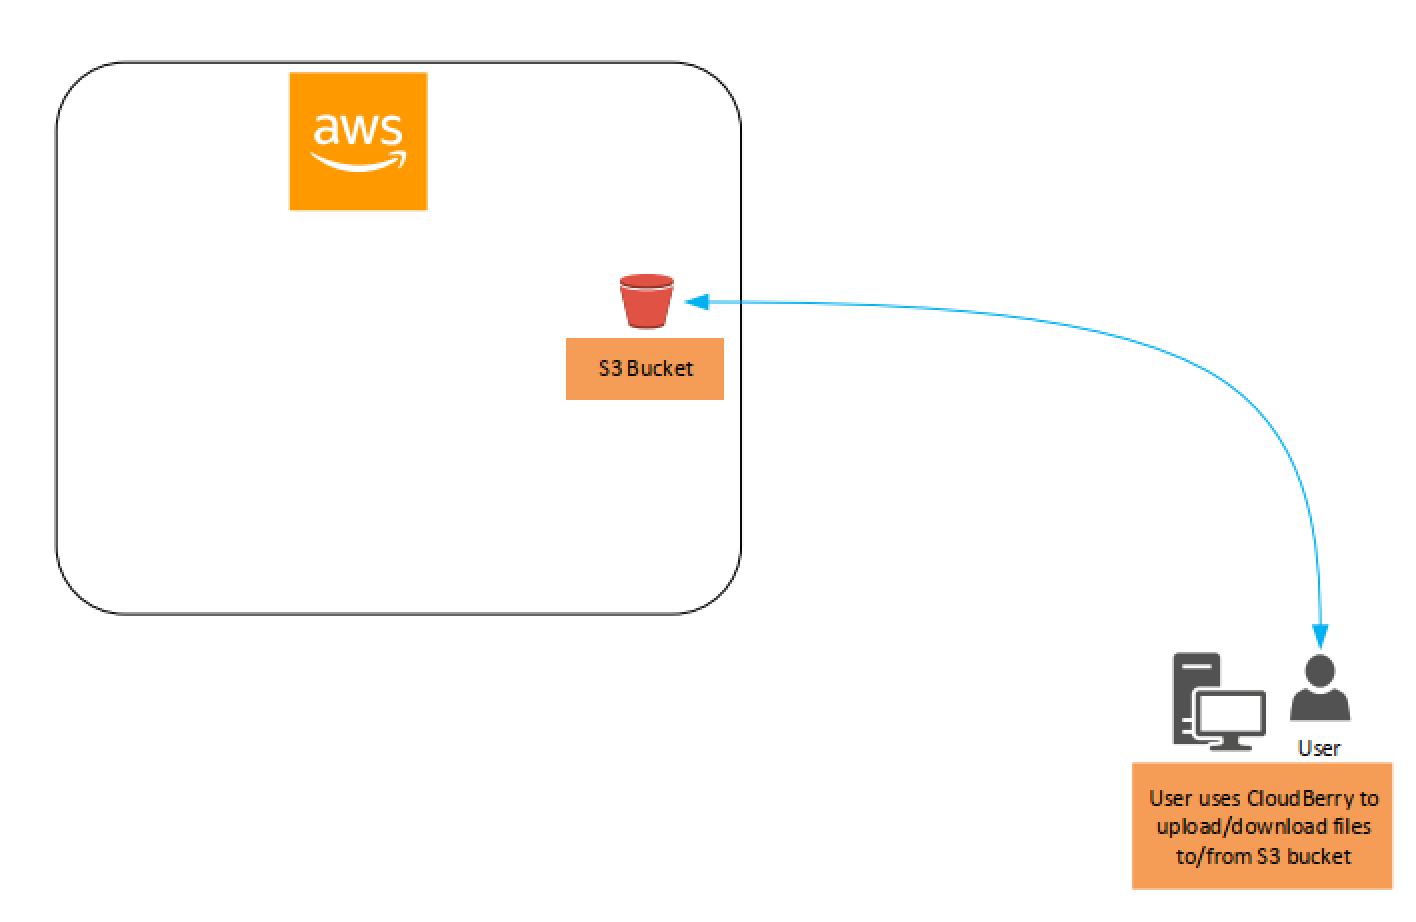 Replacing Secure FTP with Amazon S3 - Architecture